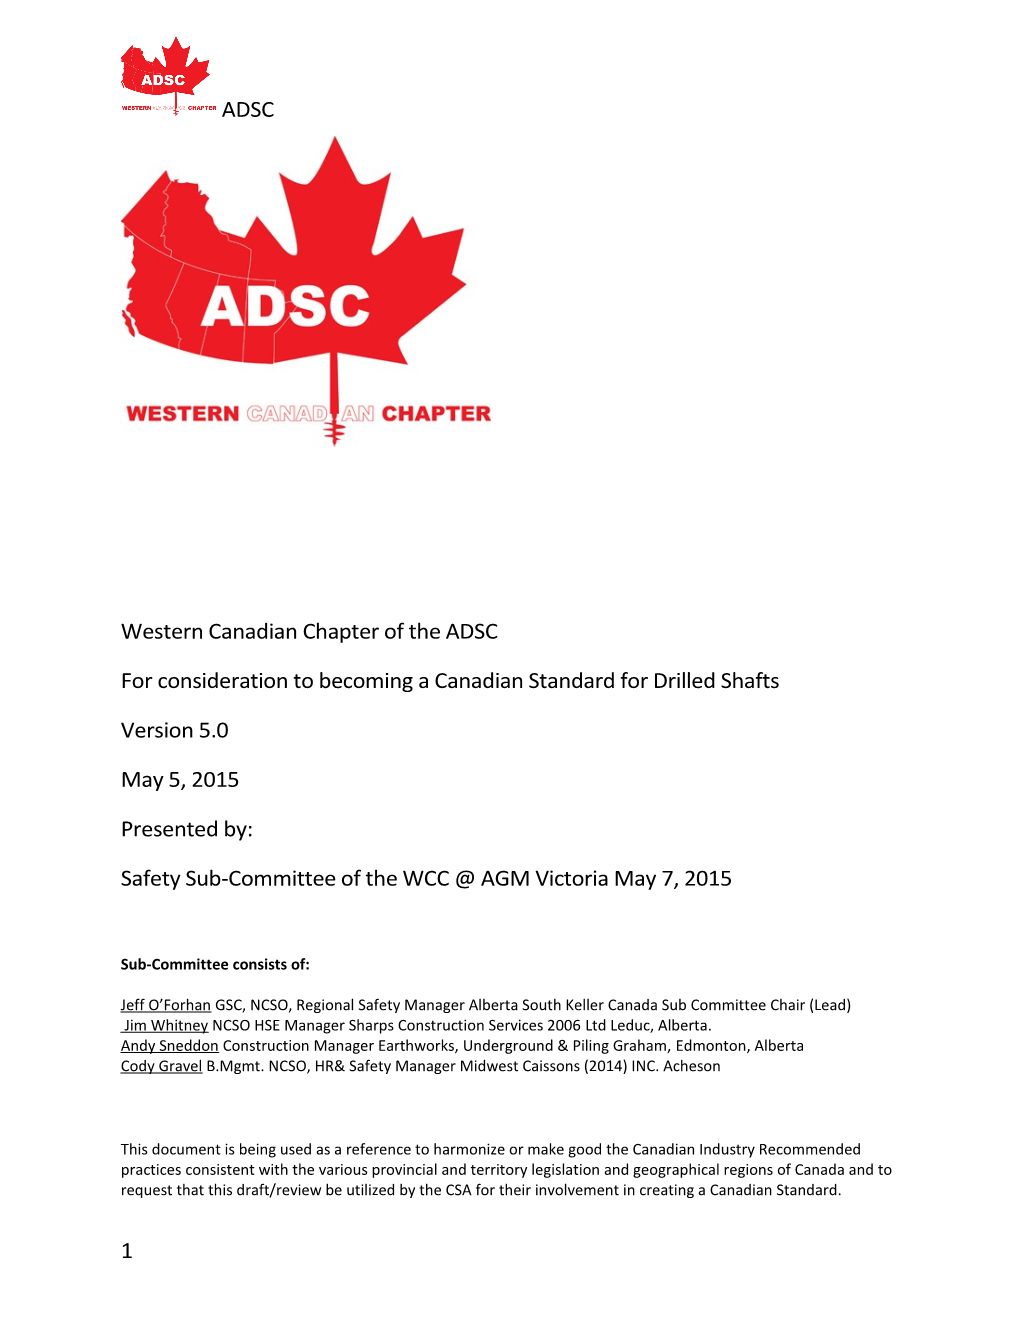 Western Canadian Chapter of the ADSC